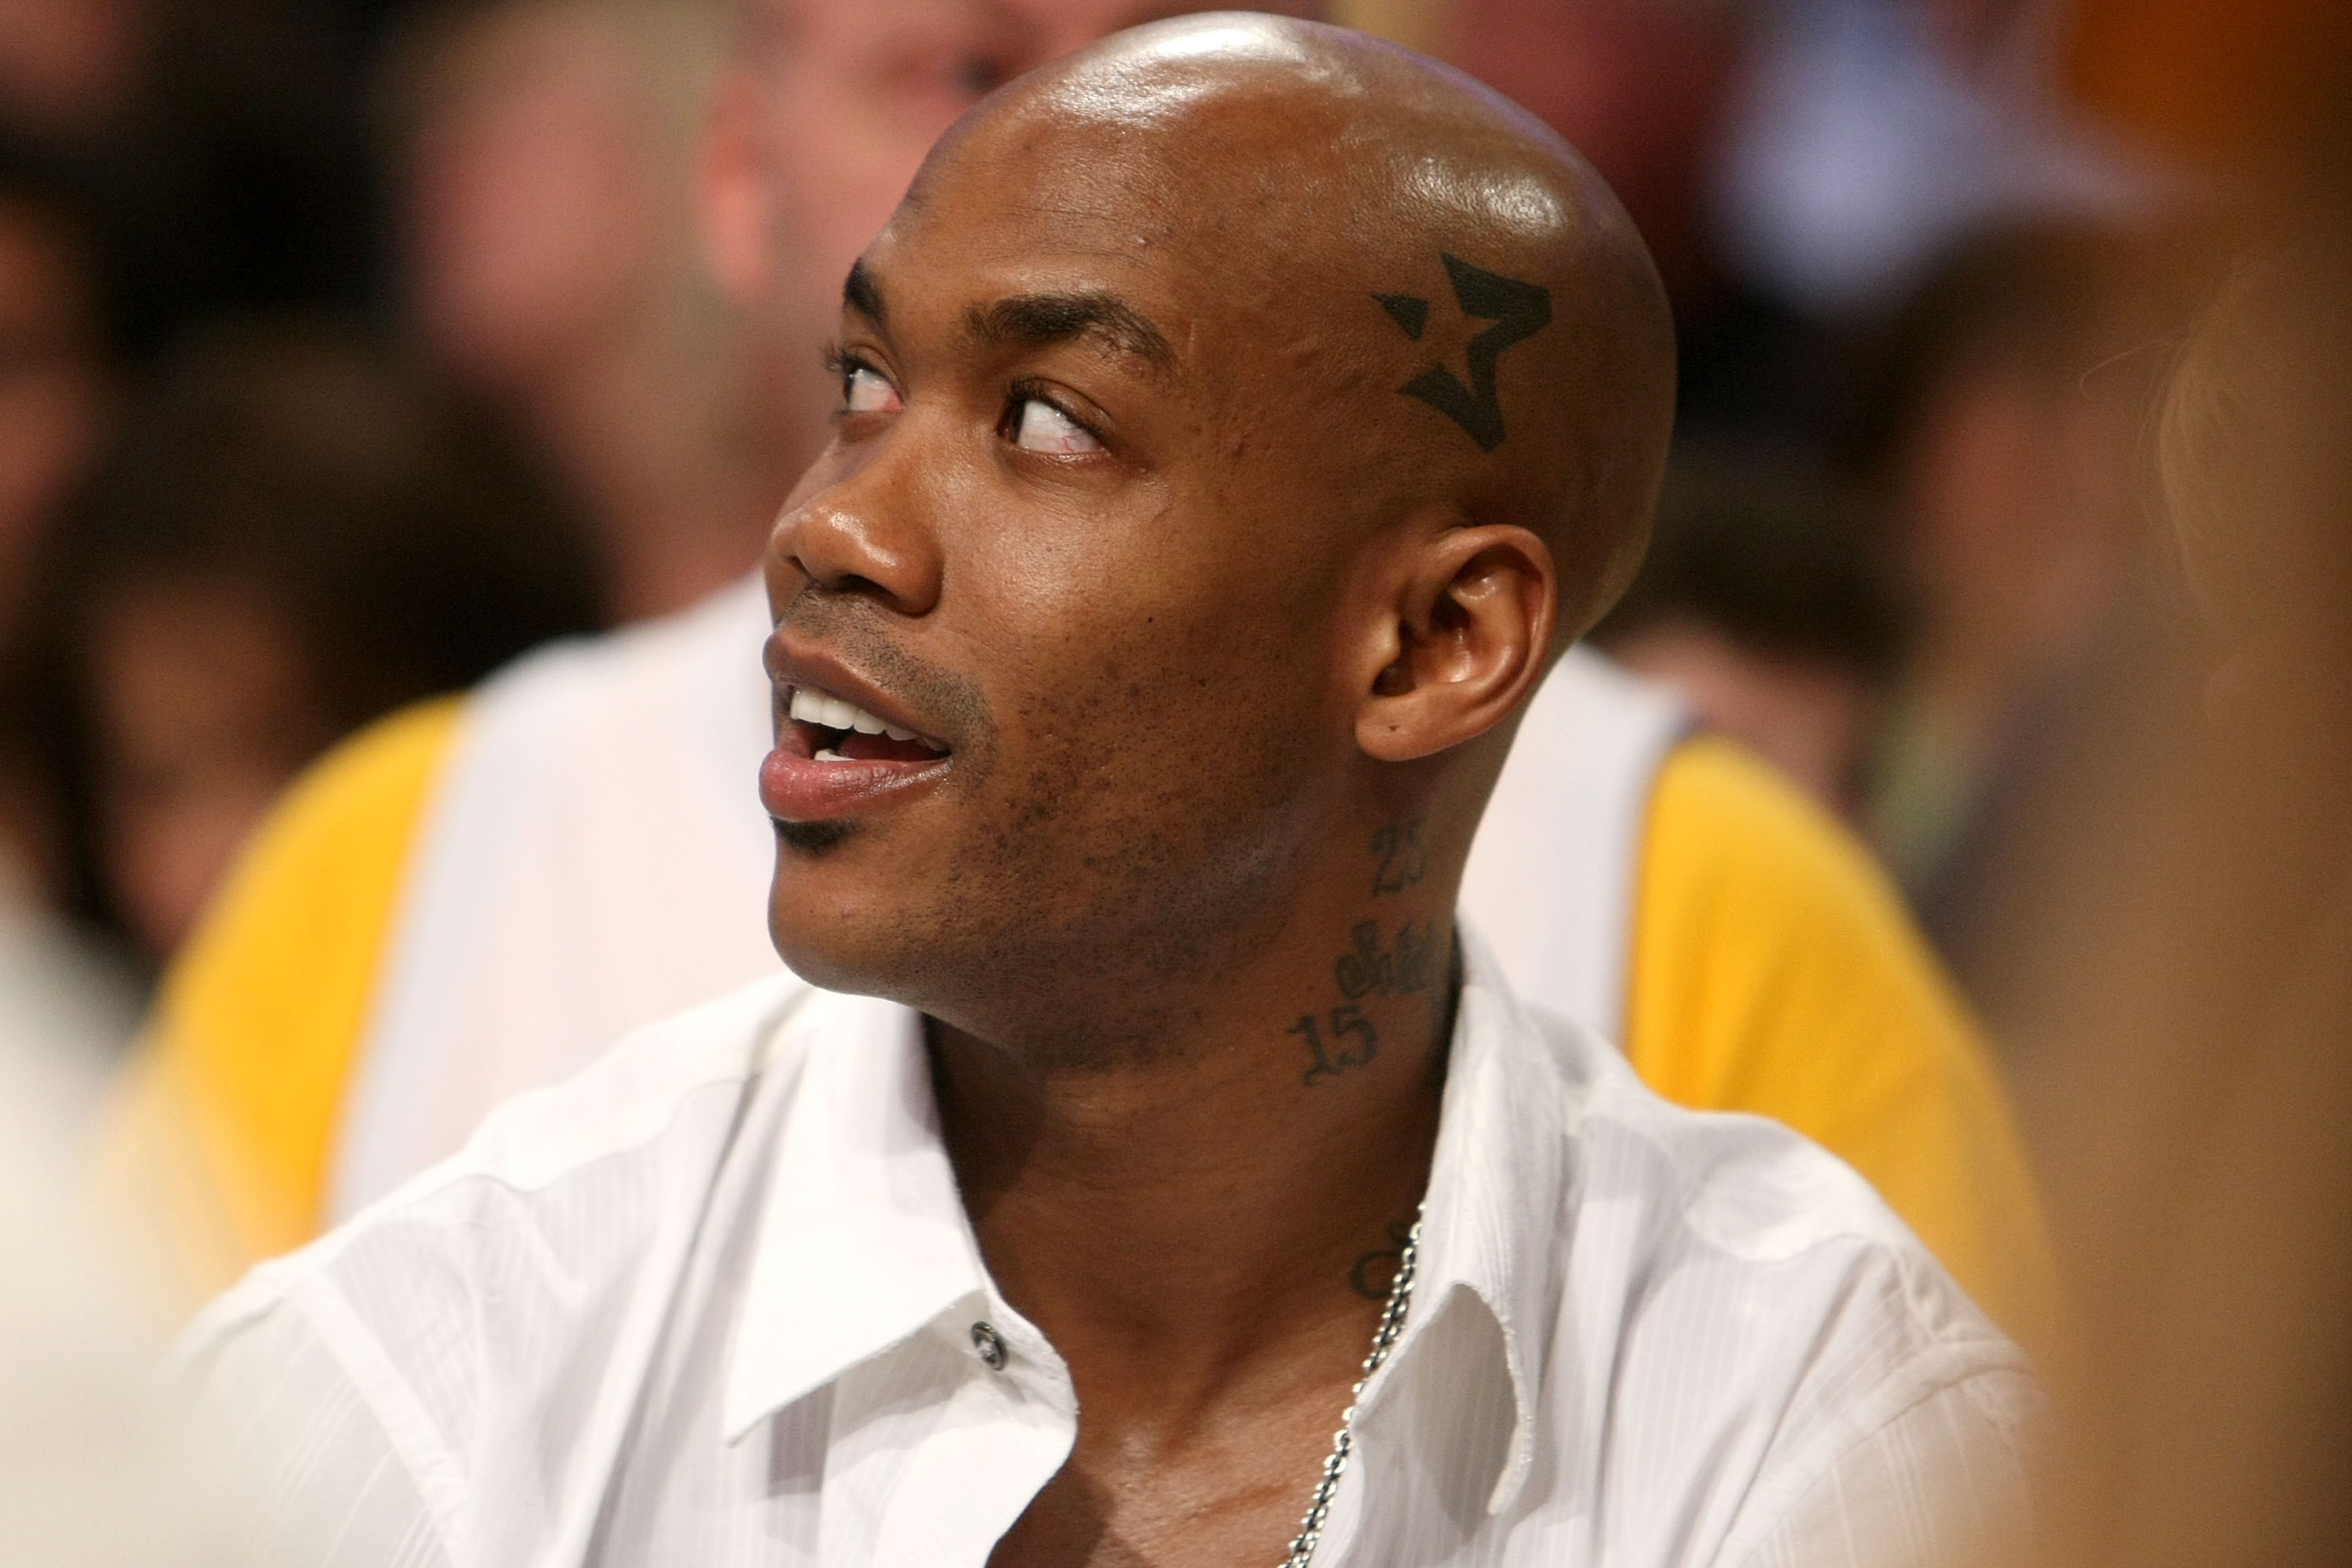 Jessica And Basketball Player Stephon Marbury Snap Cute Shots Together